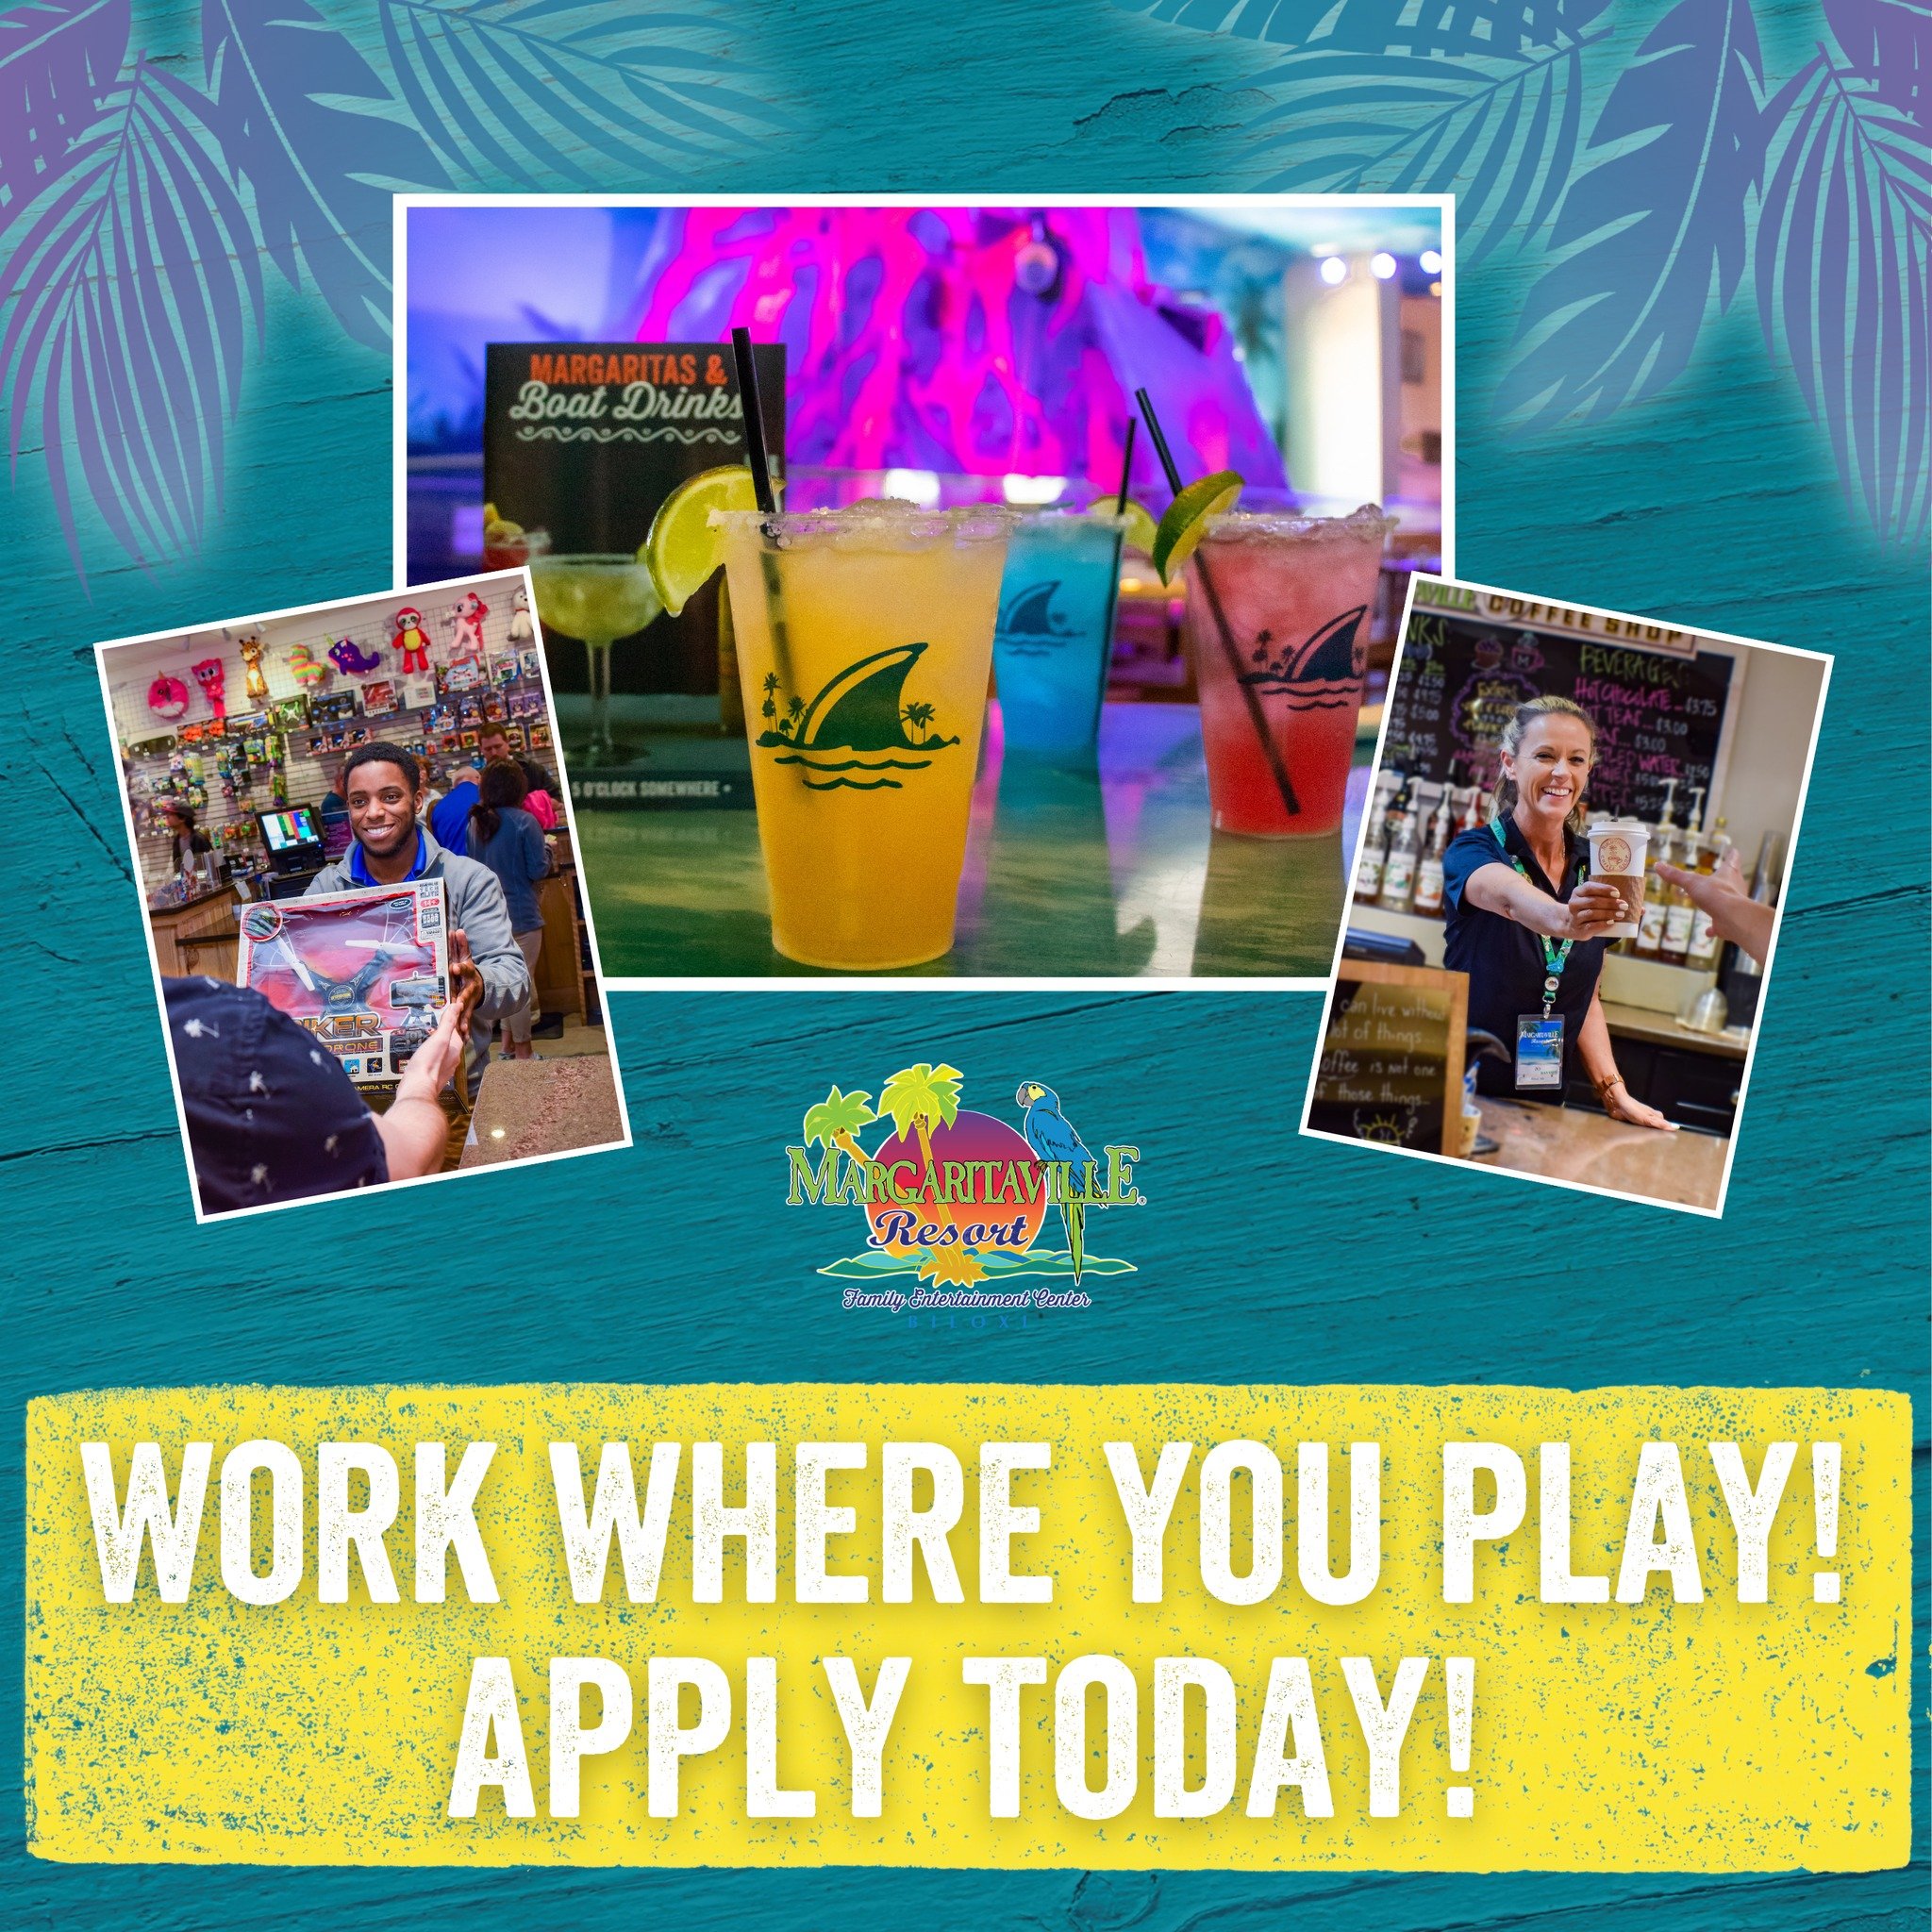 Opportunities don't always knock; sometimes, they yell, &ldquo;Fins Up!&rdquo; 

We are expanding our team! Share this with any friends that you think would fit right in.

CLICK HERE &amp; JOIN OUR TEAM! 
margaritavilleresortbiloxi.com/careers